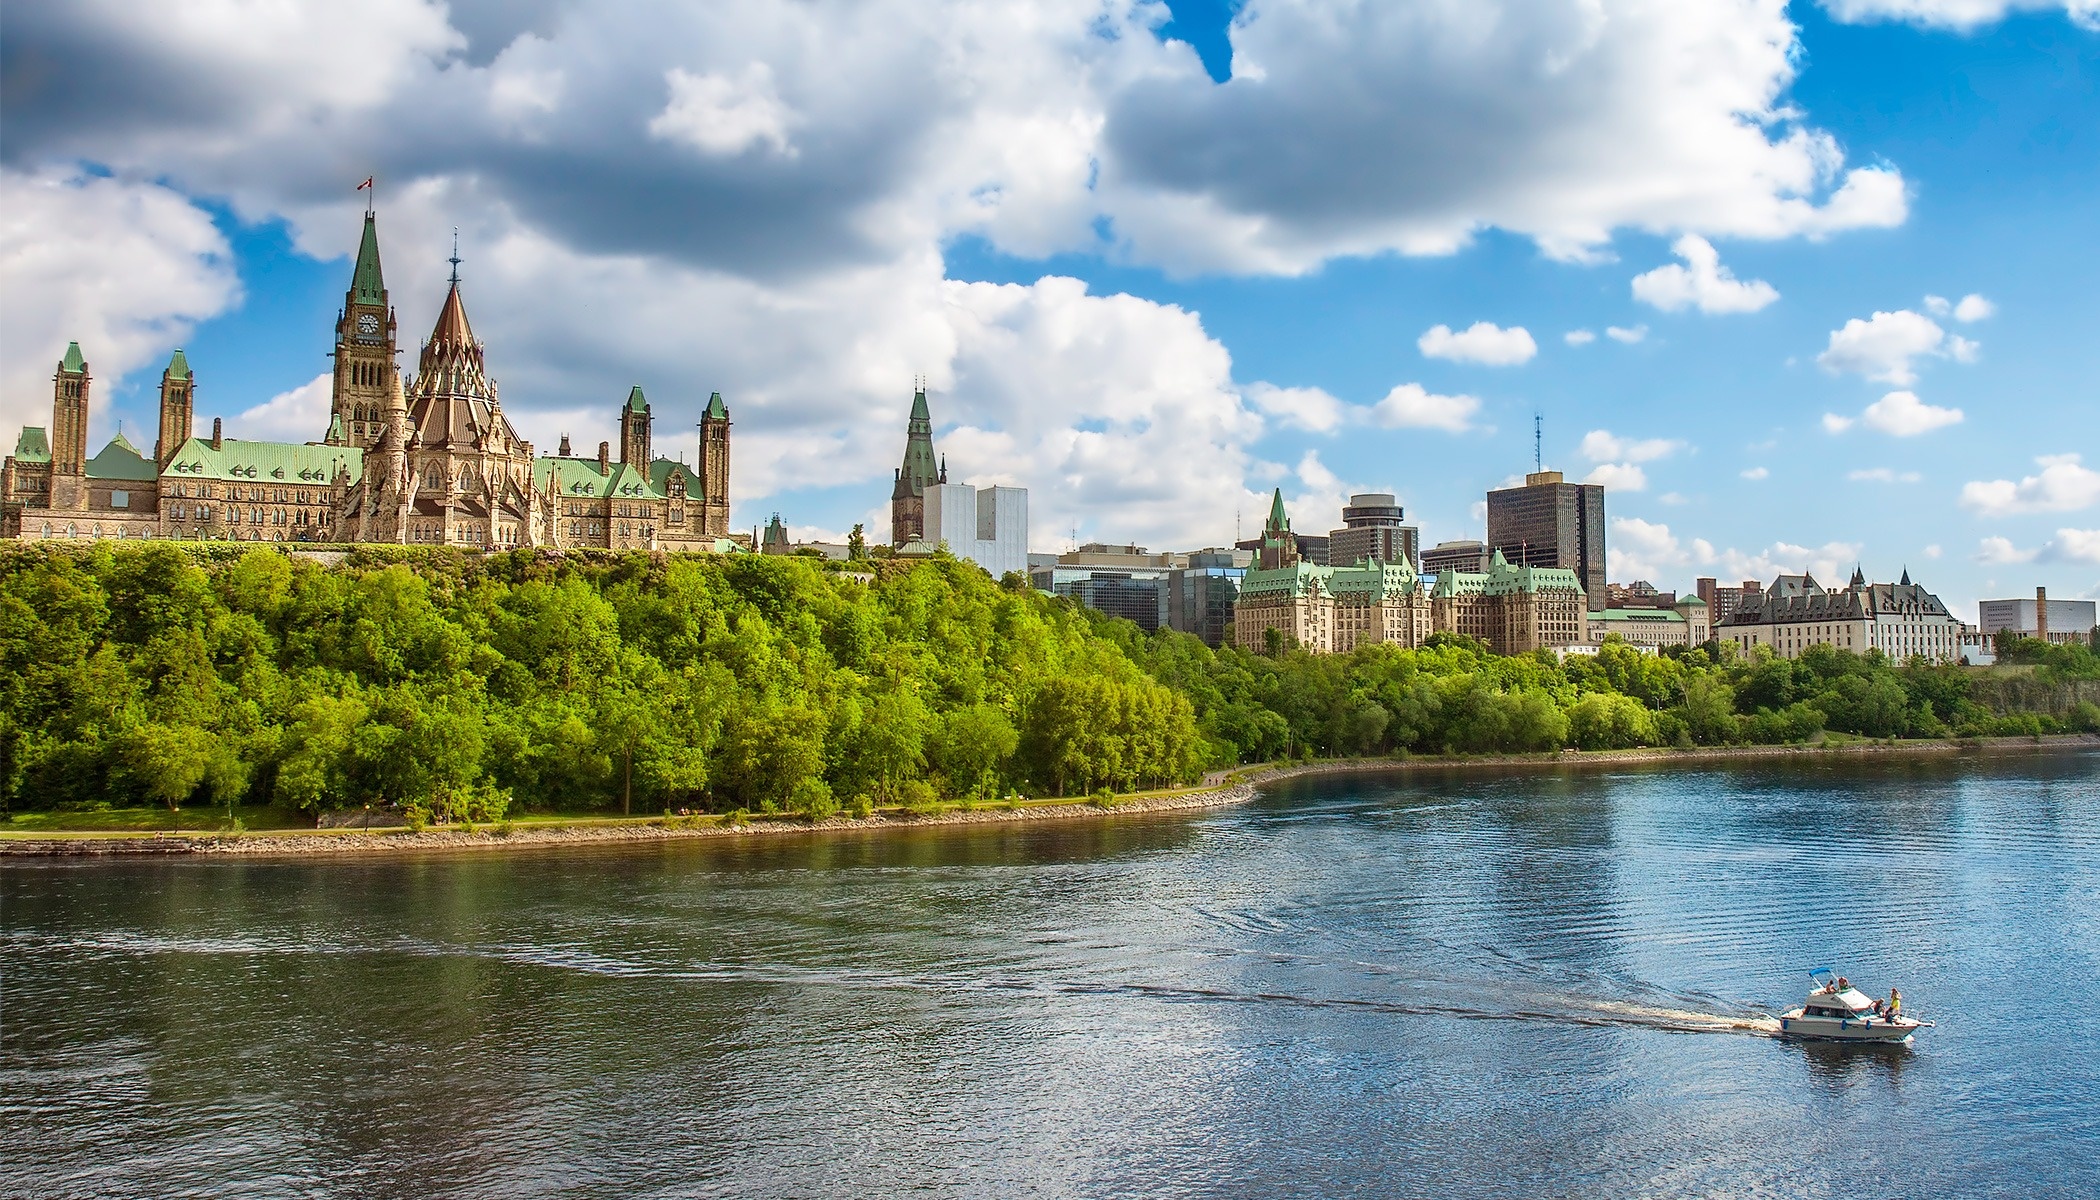 Fonds national juif du Canada | We are the regional office of JNF Canada for Ottawa, serving Canada’s Capital Region on both sides of the Ottawa River. We look forward to meeting you at our 